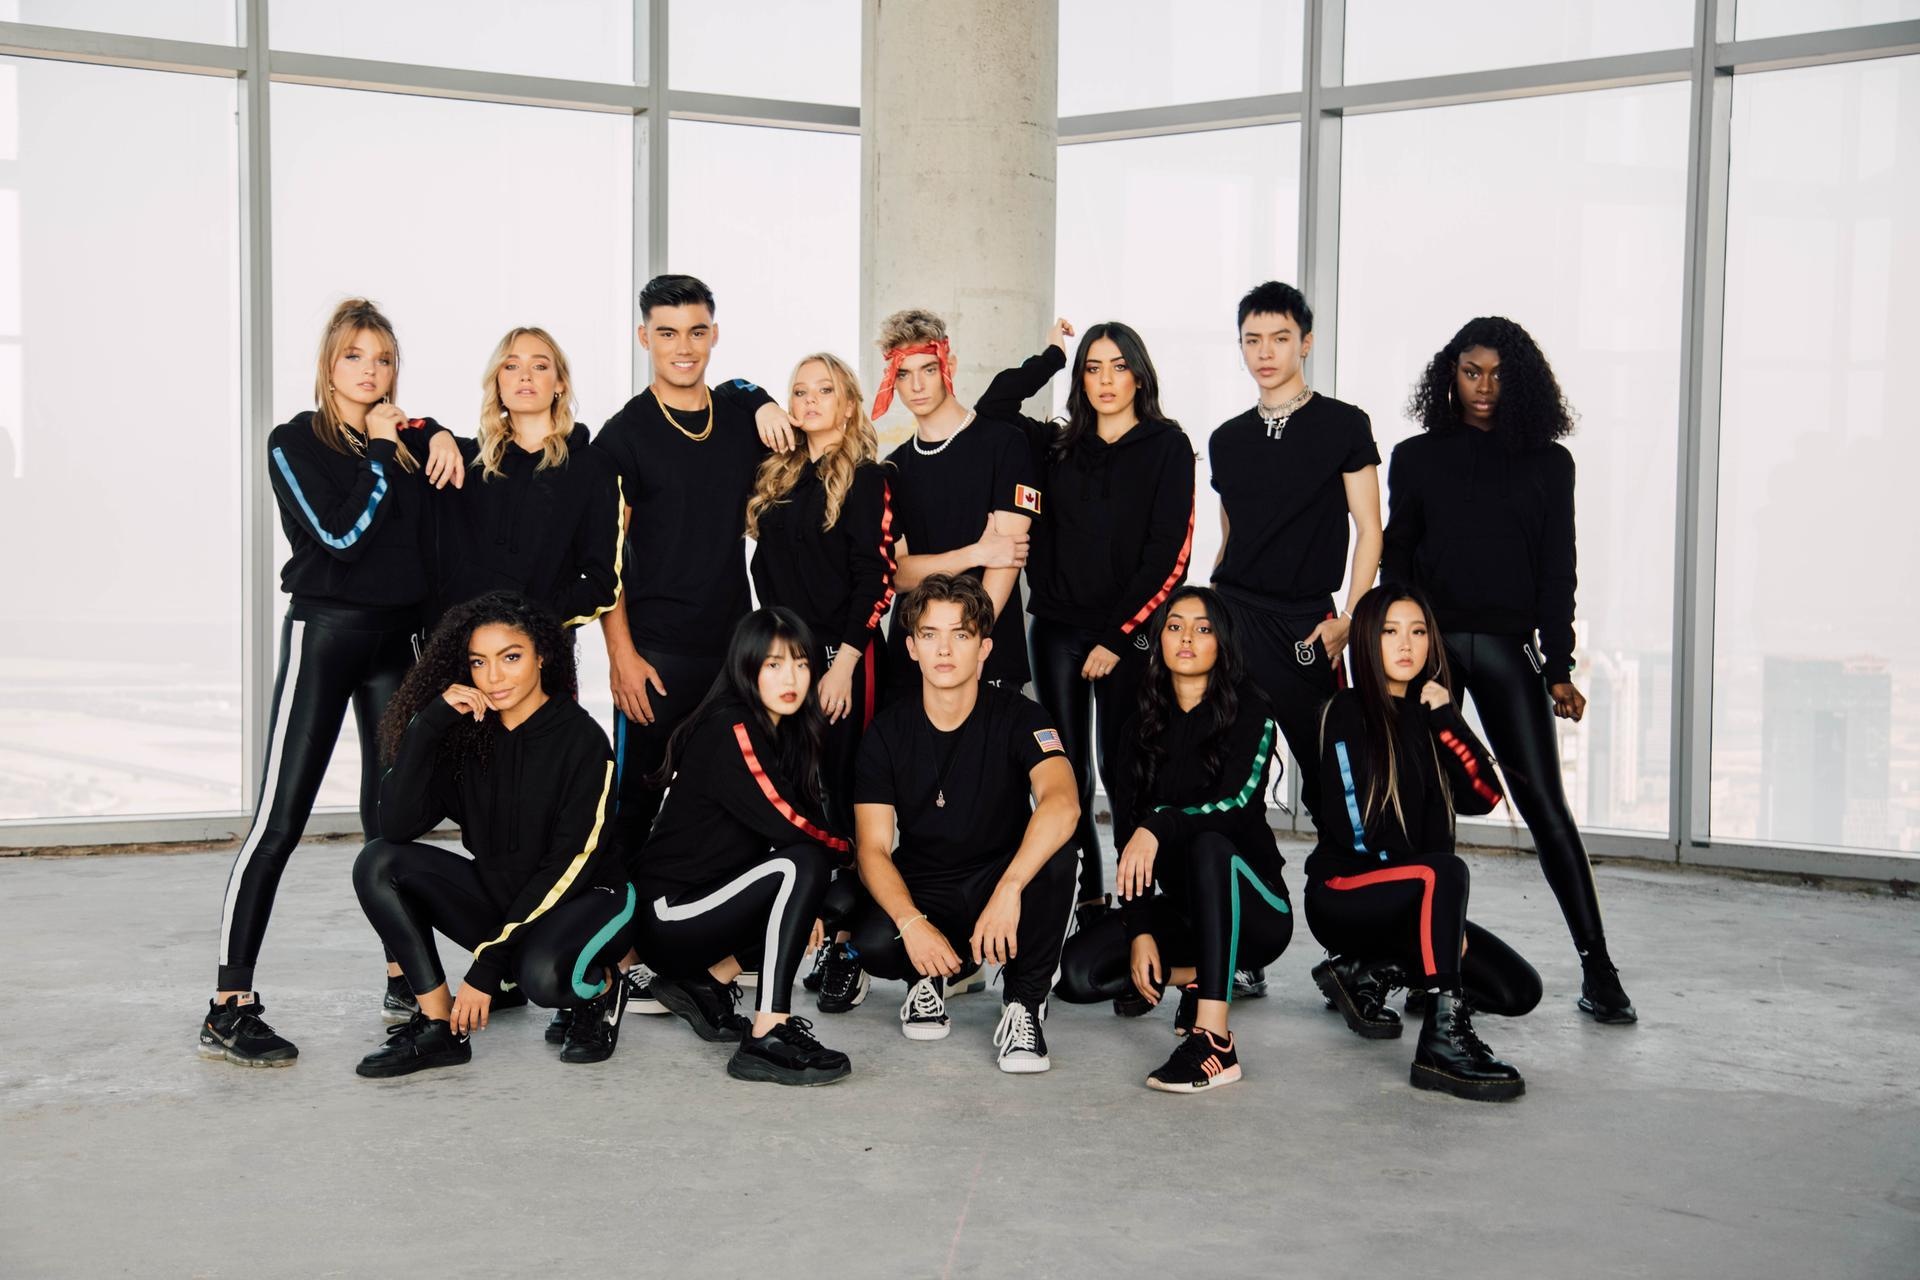 Now United (Pop group): Final auditions before a new star joined the group, Courtesy XIX Entertainment, Pop stars from Middle East or North Africa. 1920x1280 HD Wallpaper.